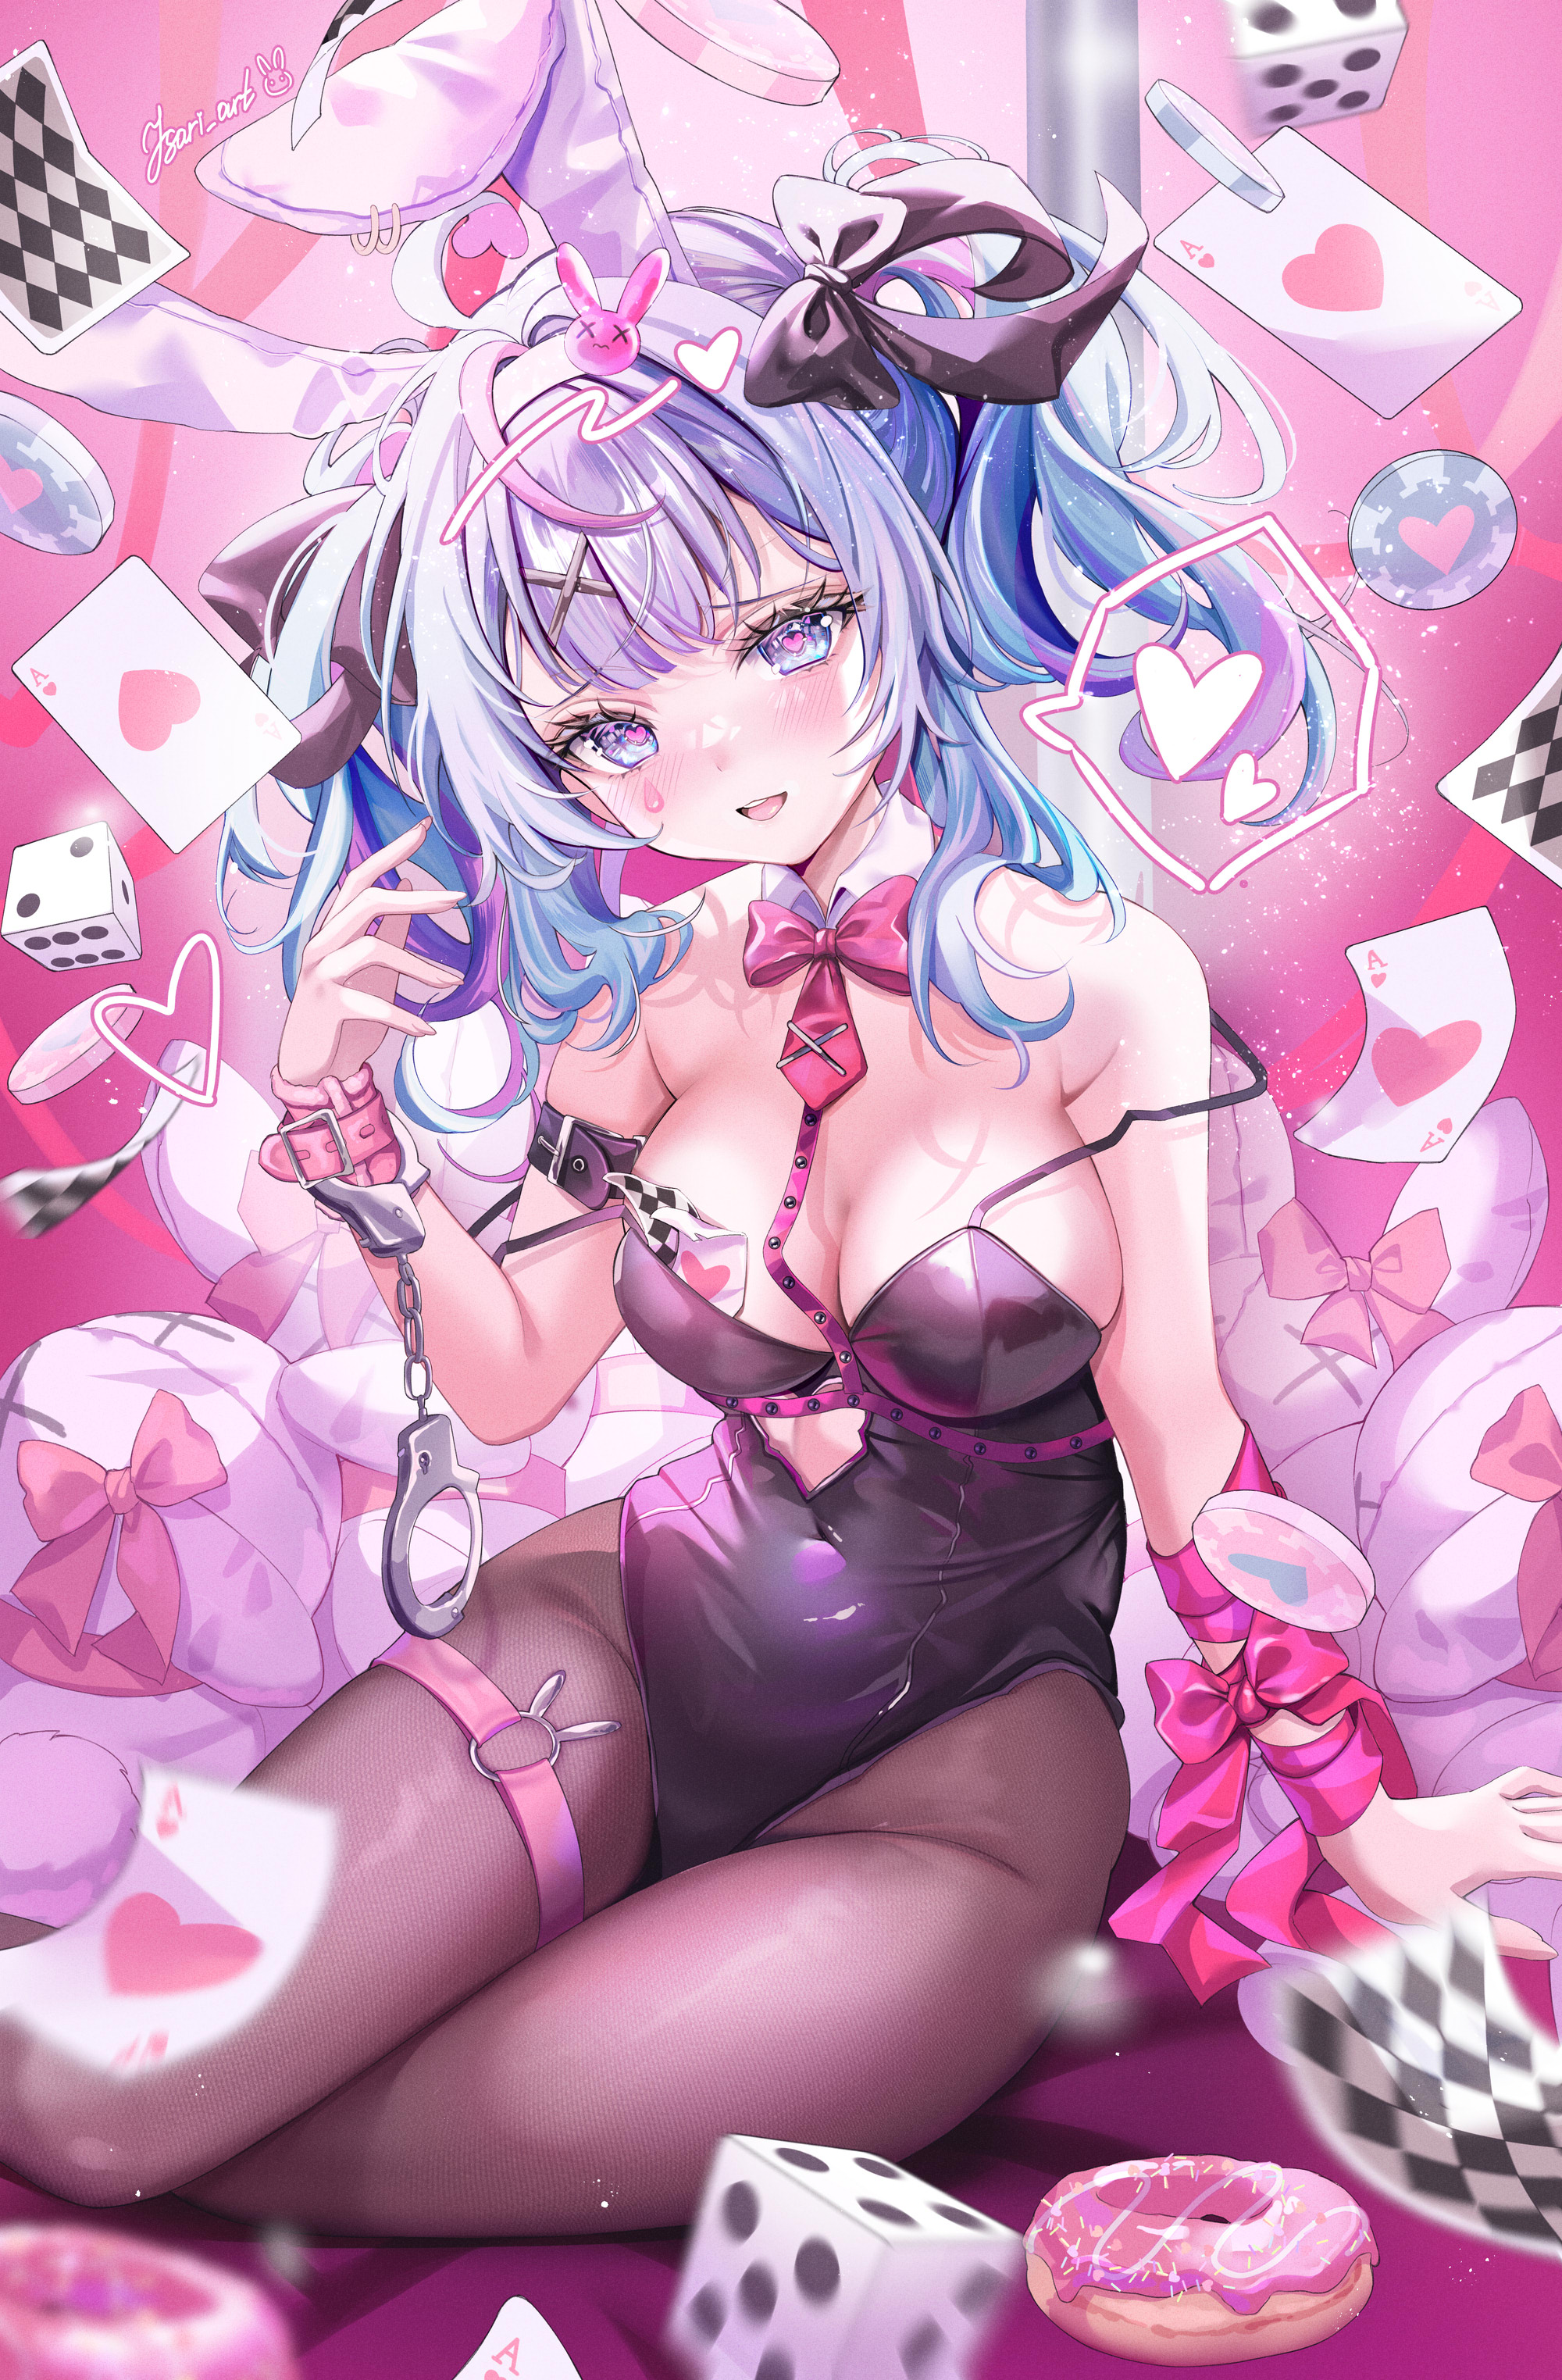 Anime 2000x3047 anime anime girls Vocaloid Hatsune Miku blue hair blue eyes pantyhose leotard handcuffs dice heart eyes donut cards blushing Isari sensei poker chips animal ears bunny ears heart portrait display ribbon pink ribbon stuffed animal cleavage looking at viewer ahoge bunny suit bunny girl strap falling off shoulder open mouth long hair thigh strap purple leotard